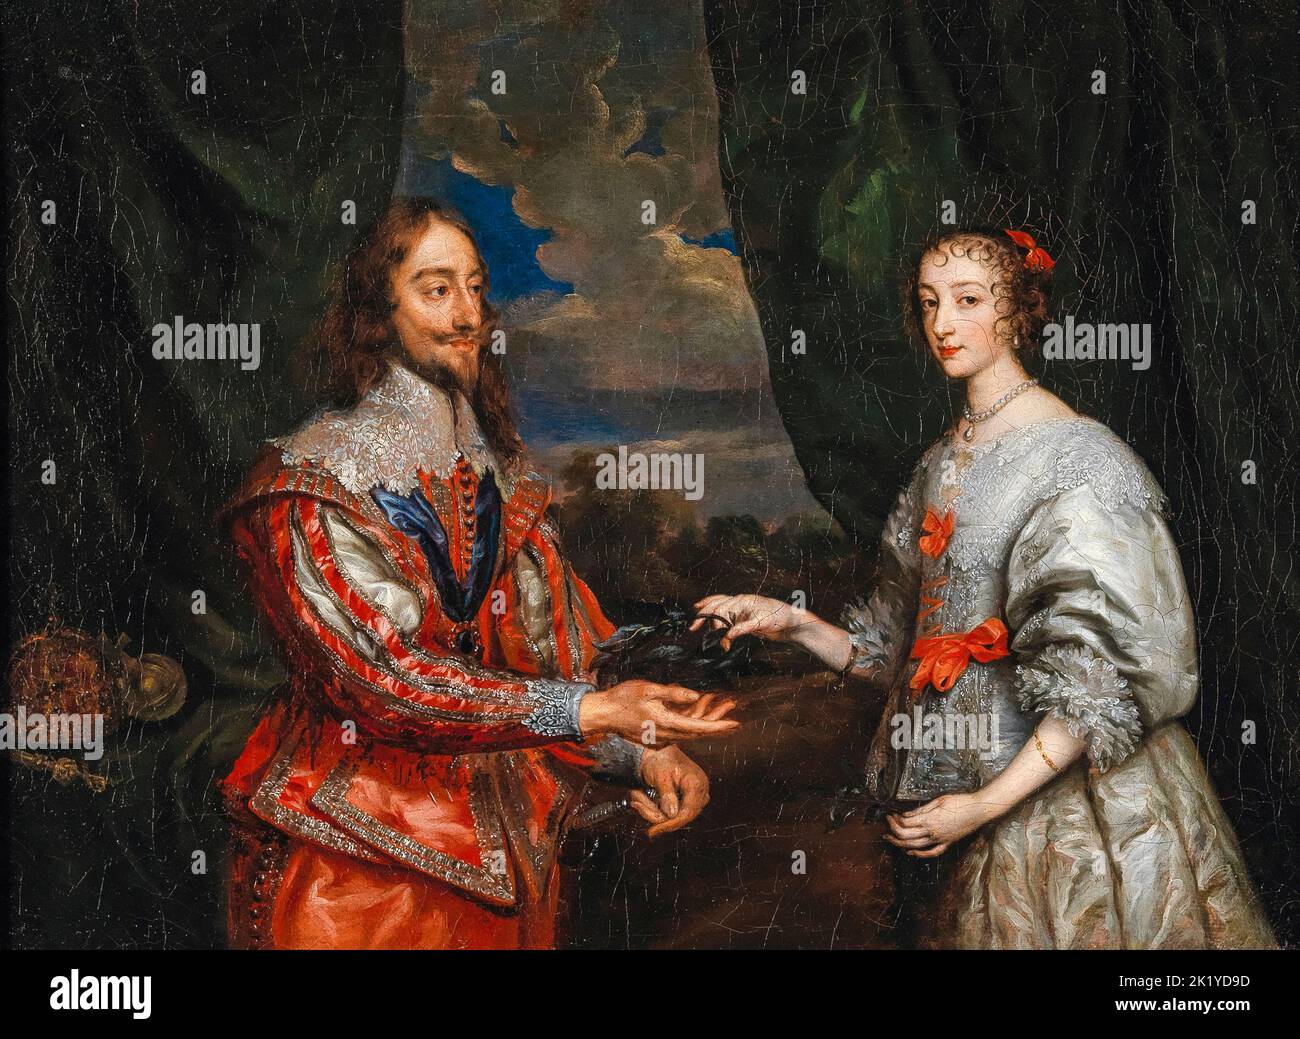 King Charles I (1600-1649), and Queen Henrietta Maria (1609-1669), of England, Scotland, and Ireland, portrait painting in oil on canvas by Workshop of Anthony van Dyck, before 1641 Stock Photo